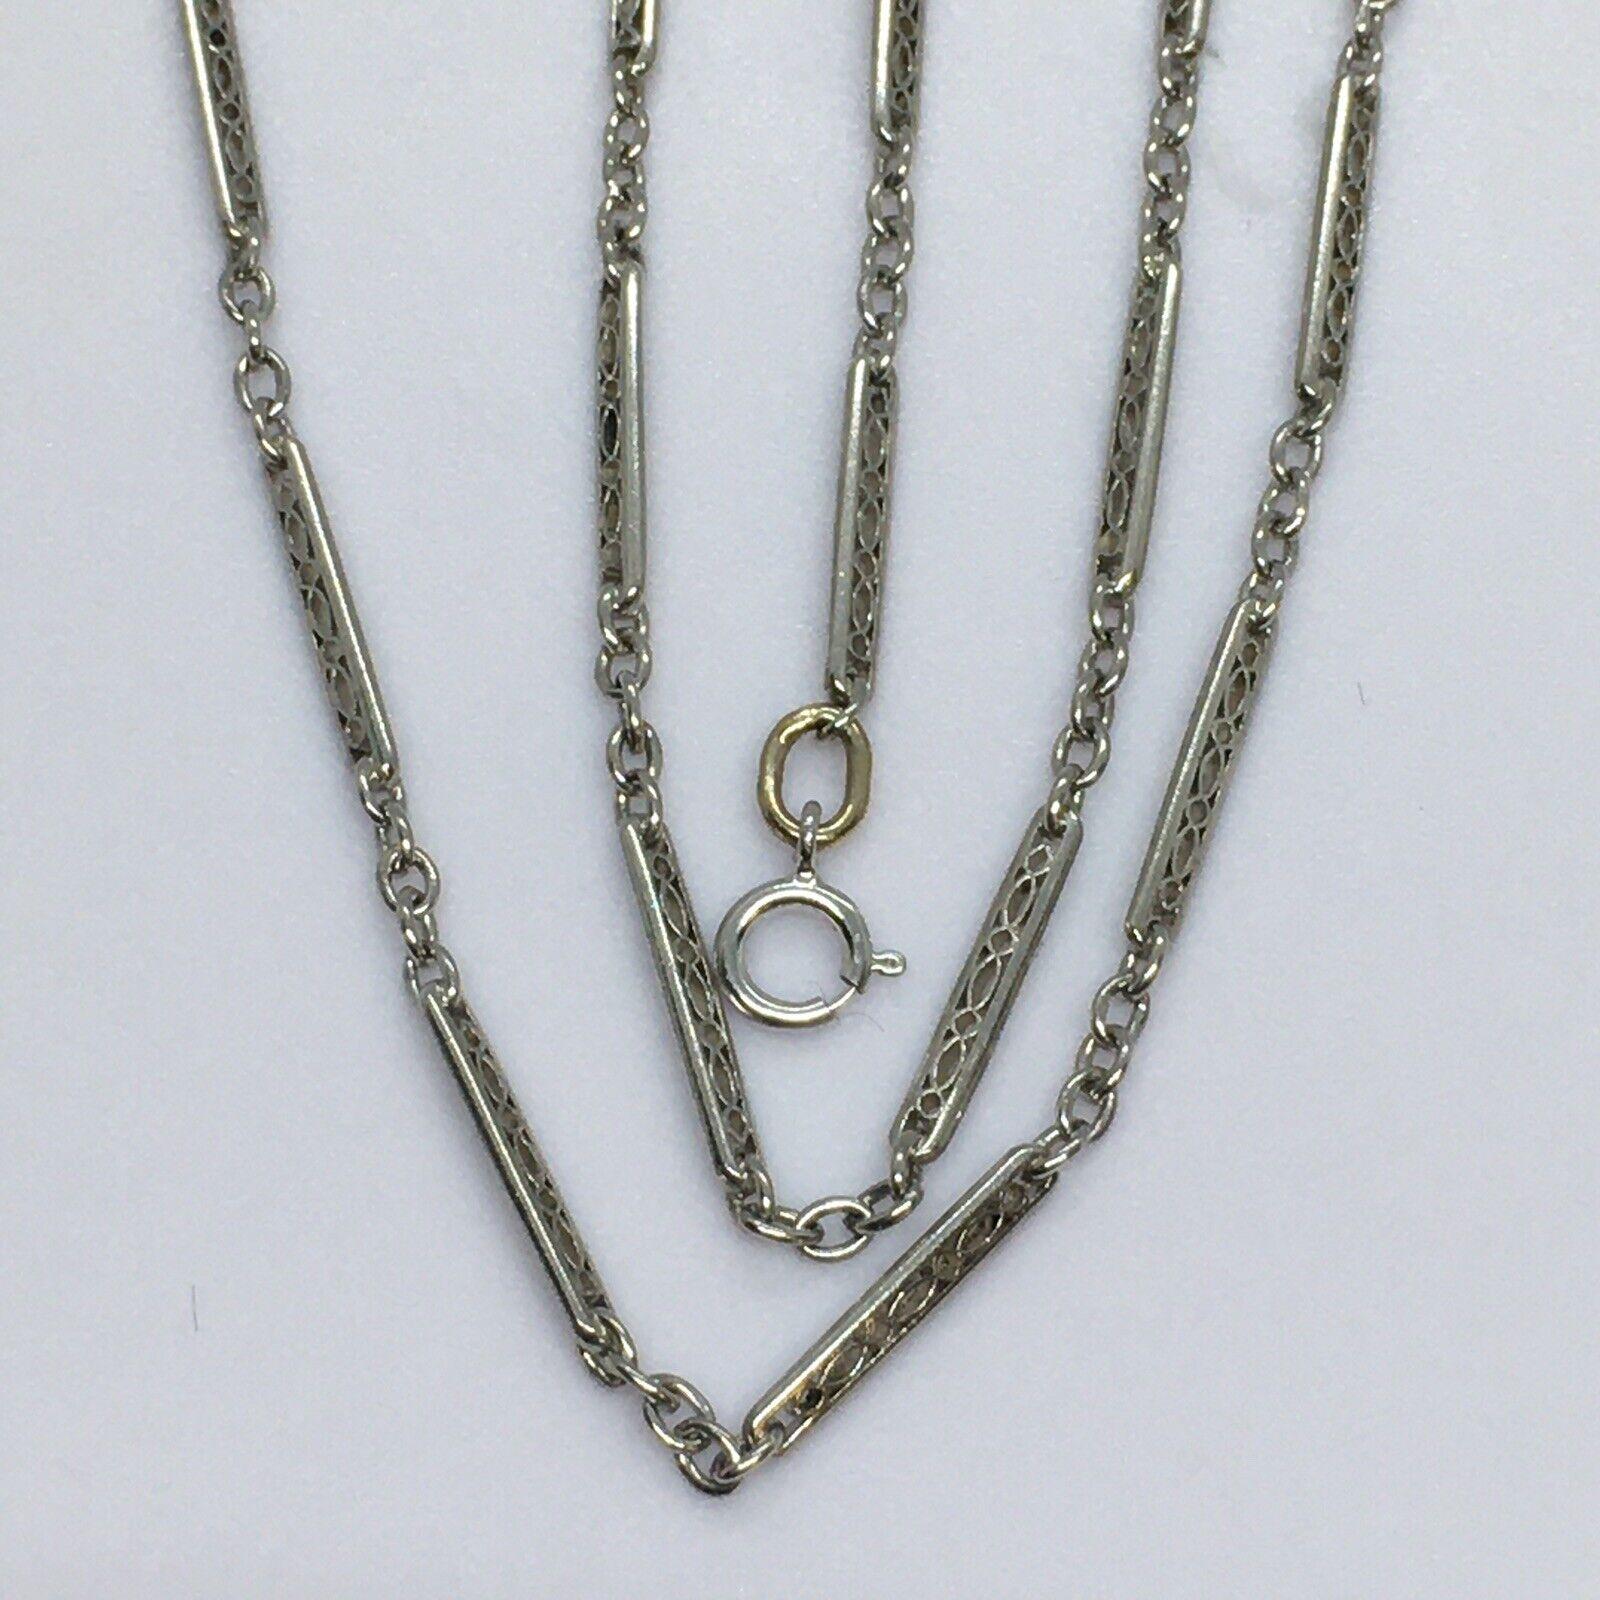 Art Deco Filigree Platinum Pocket Watch Fob Chain

Length 20.5 Inch
Measurements 14 mm filigree bars in 2 mm wide, 2 mm smaller links
Metal Platinum, tested at 90%
Weight 8 Gram
Condition Gently used, No sign of repairs, see pictures
Art Deco period